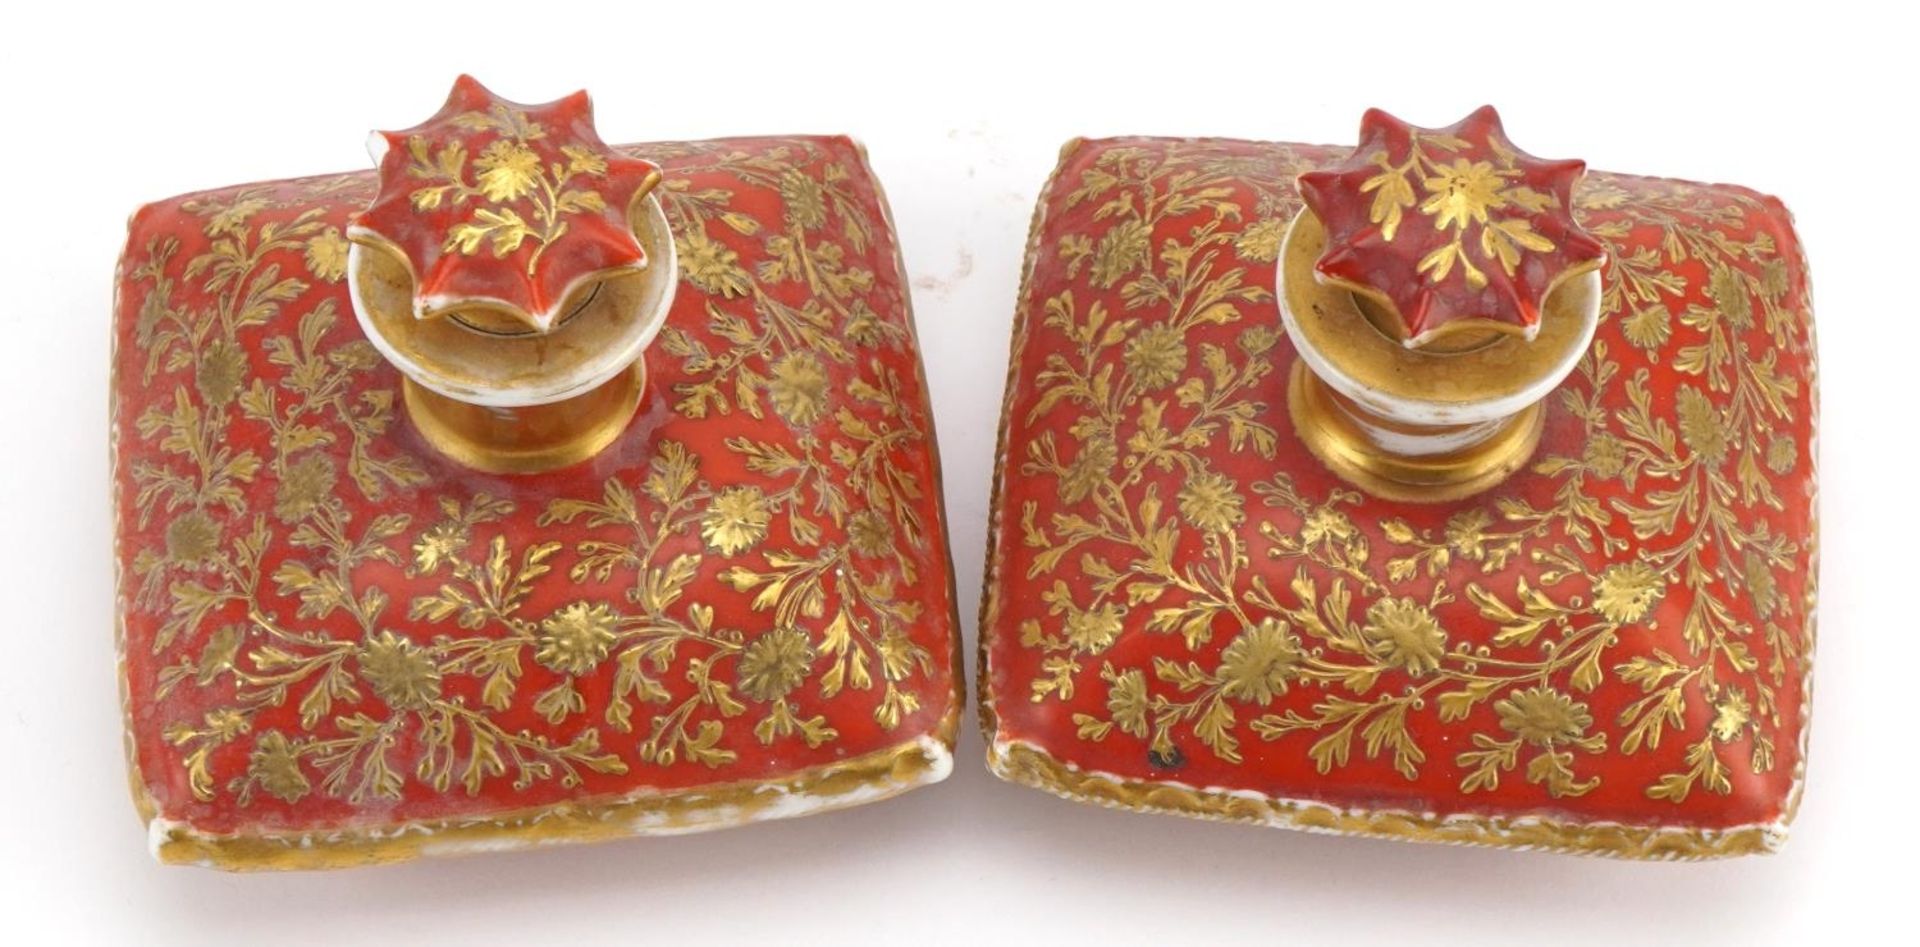 Pair of 19th century French porcelain scent bottles gilded with flowers, each 8.5cm high - Bild 3 aus 4